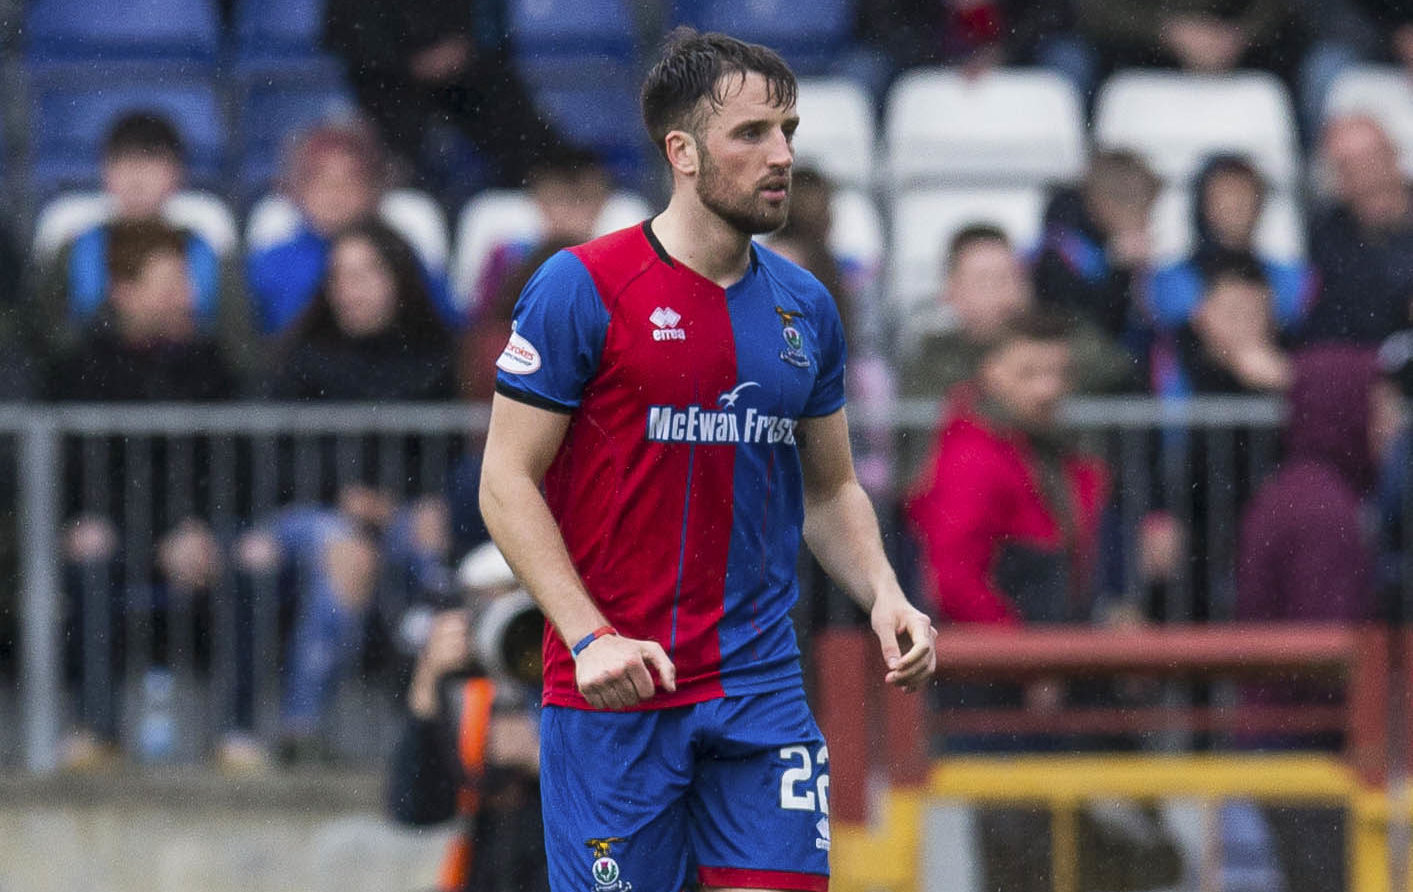 20/04/19 LADBROKES CHAMPIONSHIP
INVERNESS CT v DUNDEE UTD (0-2)
TULLOCH CALEDONIAN STADIUM - INVERNESS
Inverness CT's Brad McKay leaves the field after being sent off